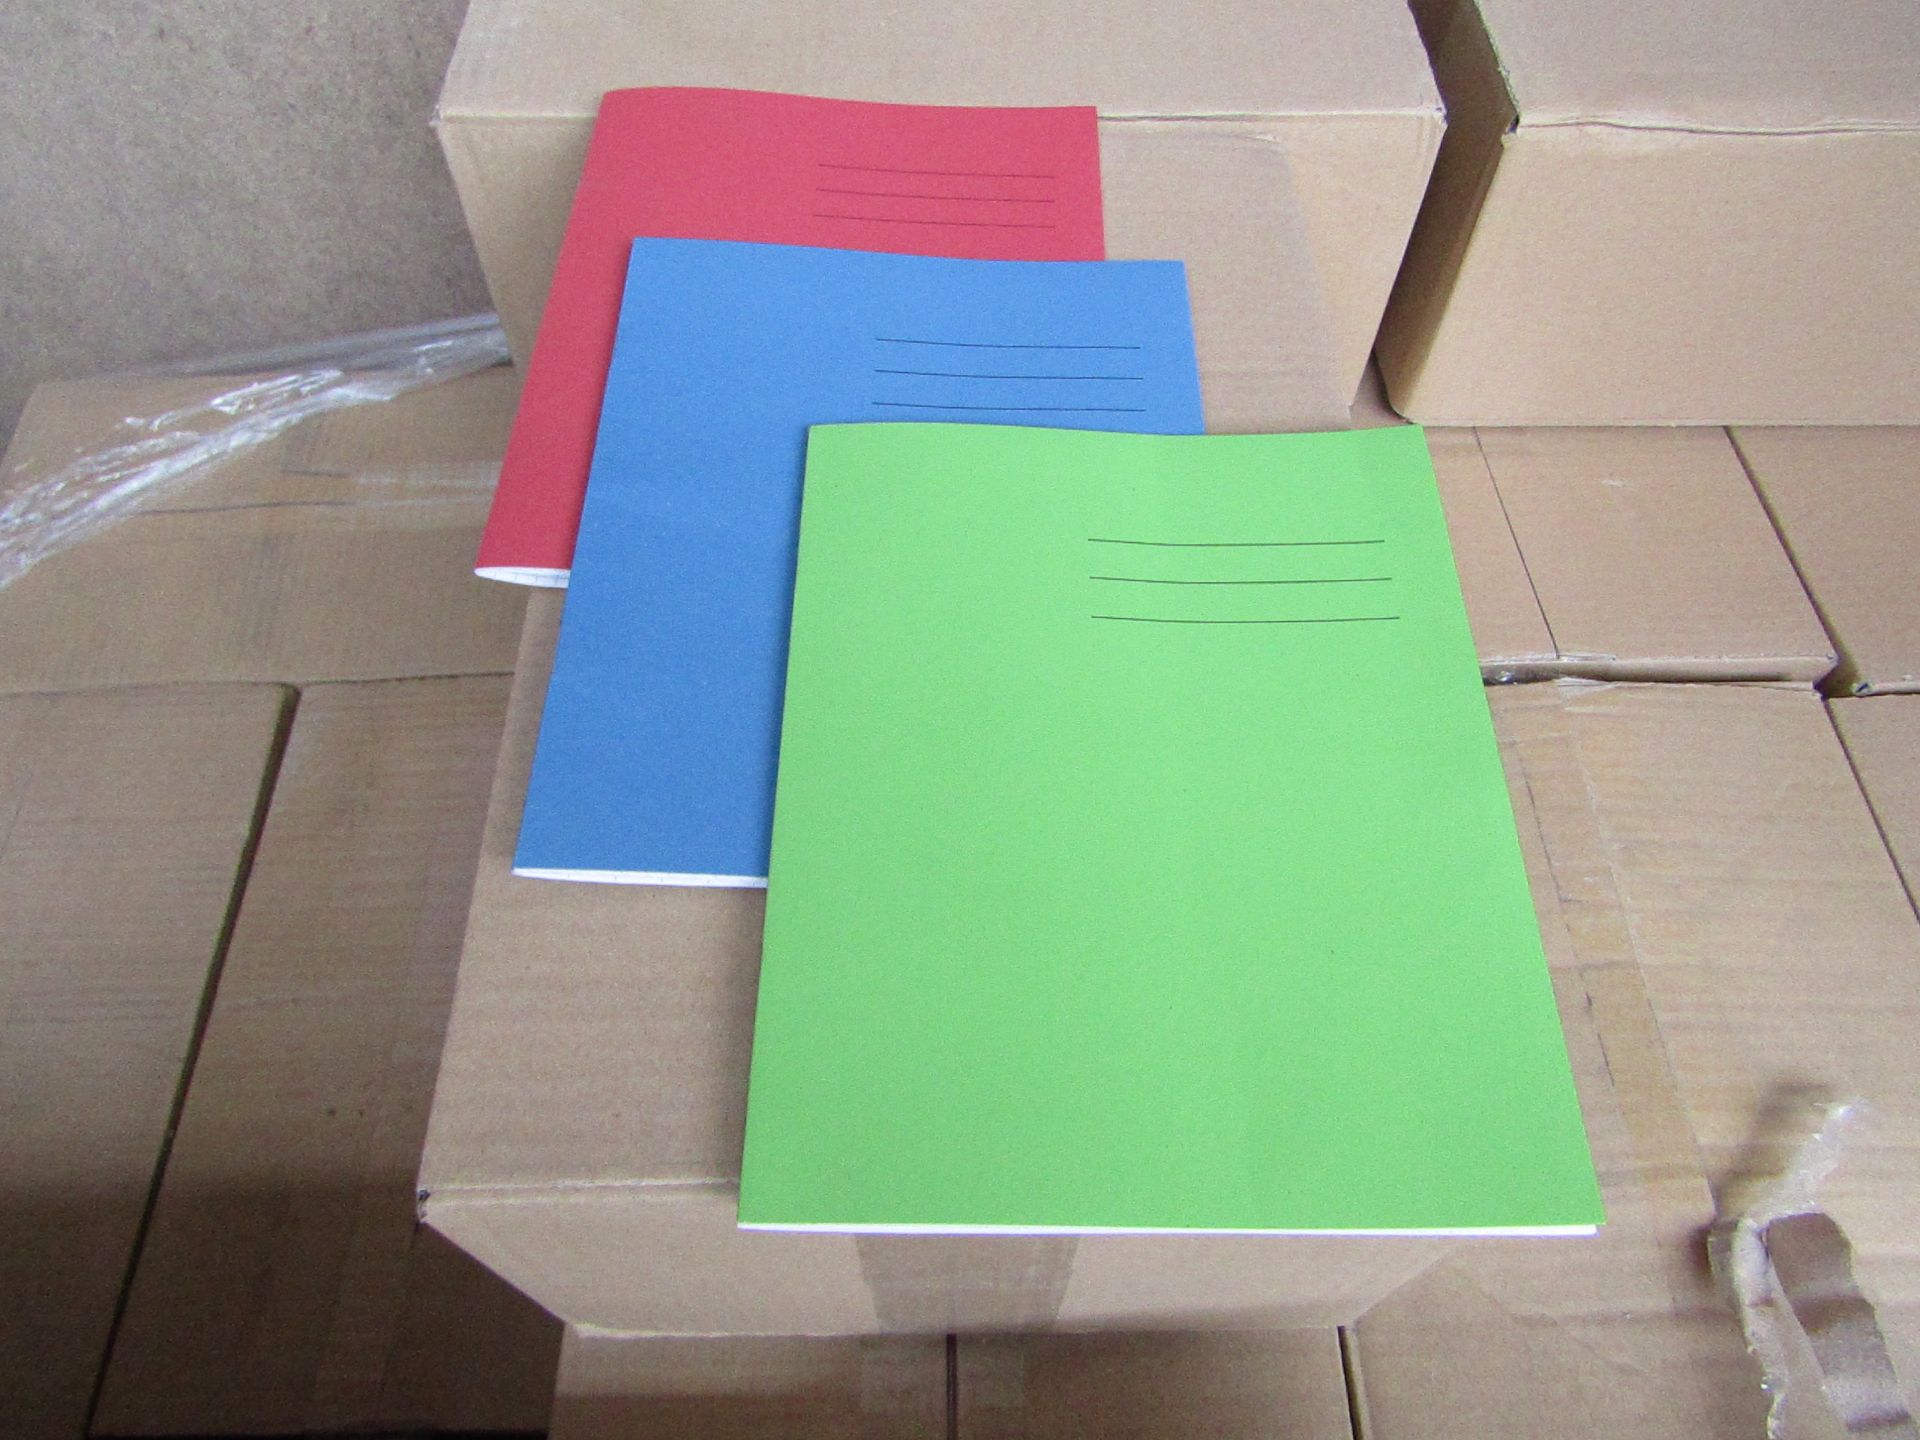 Box of approx 100 Exercise Books color may vary, new and sealed in box